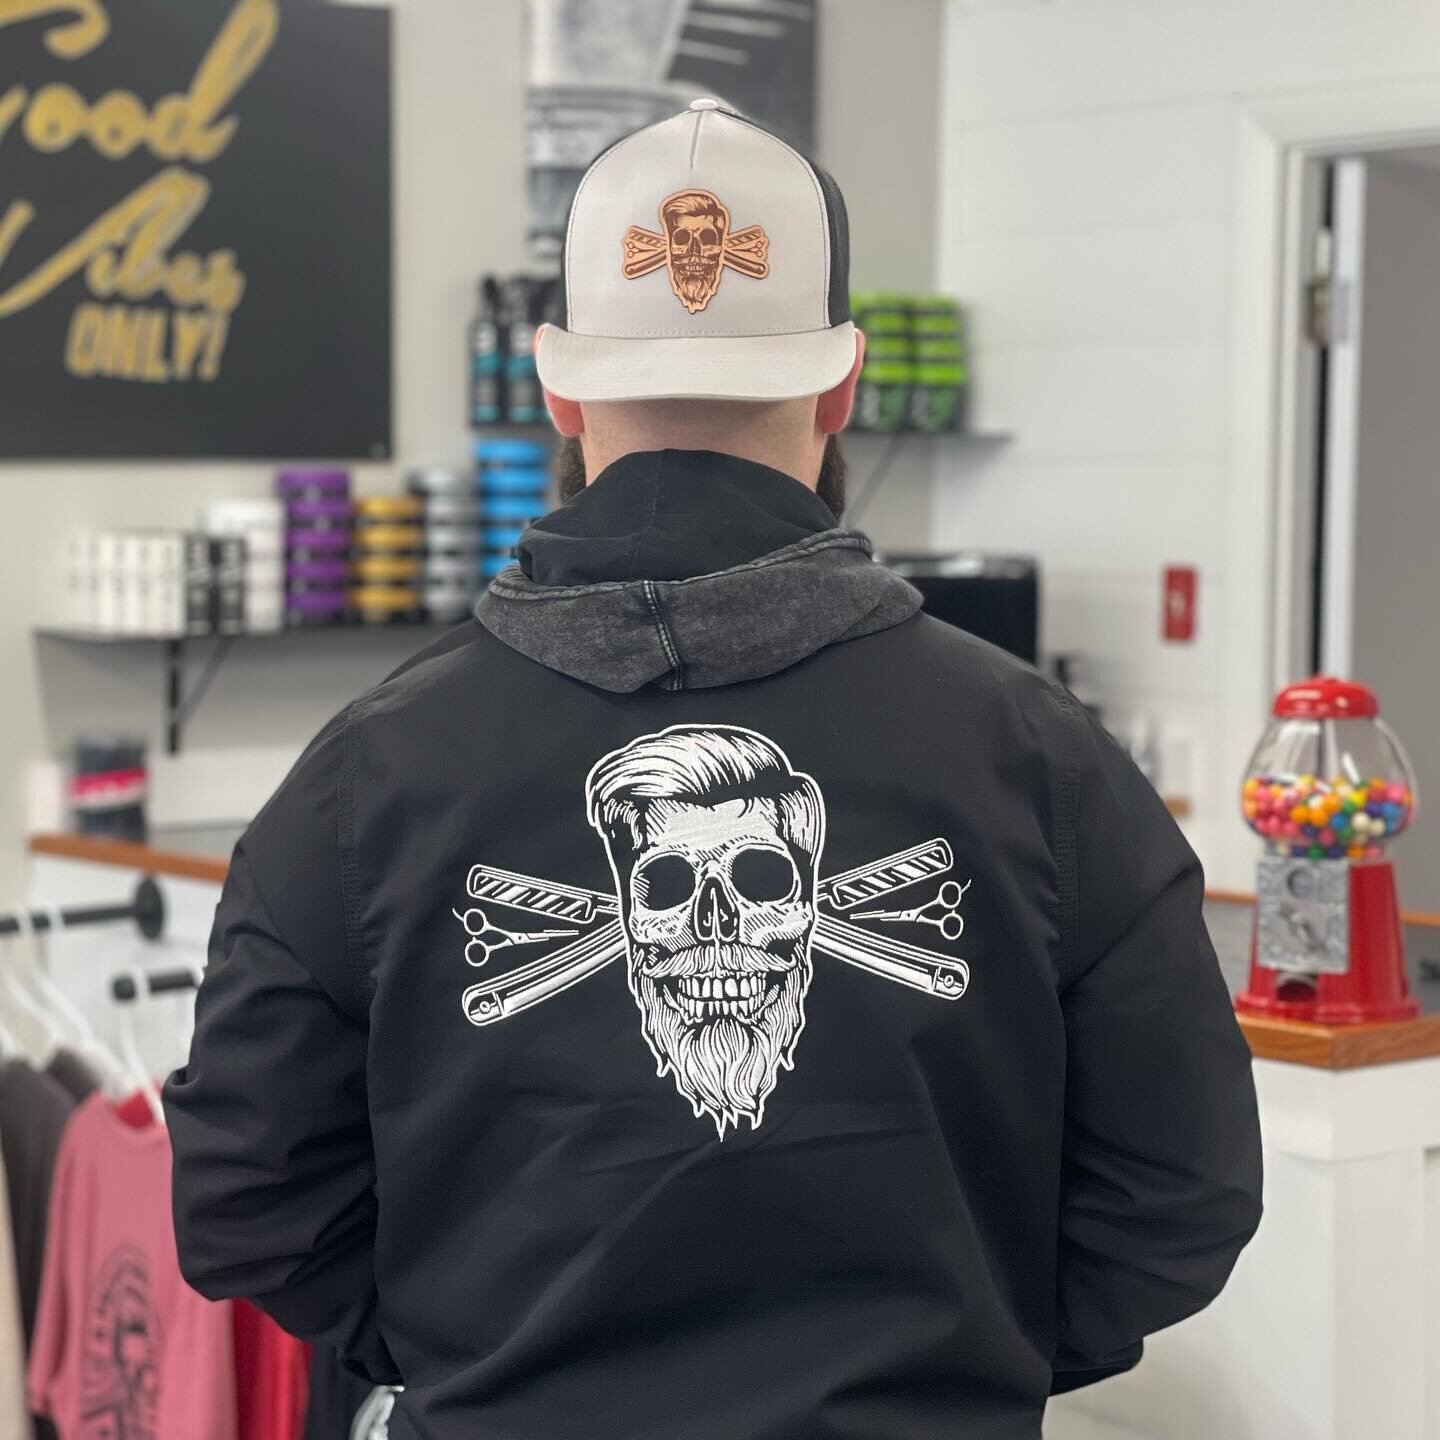 These new @barbers_beards dickies work jackets that were designed by @blkmktri and printed by @highoctaneprint came out absolutely 🔥🔥🔥🔥🔥 thank you guys for the best drip 💧 as always 💯